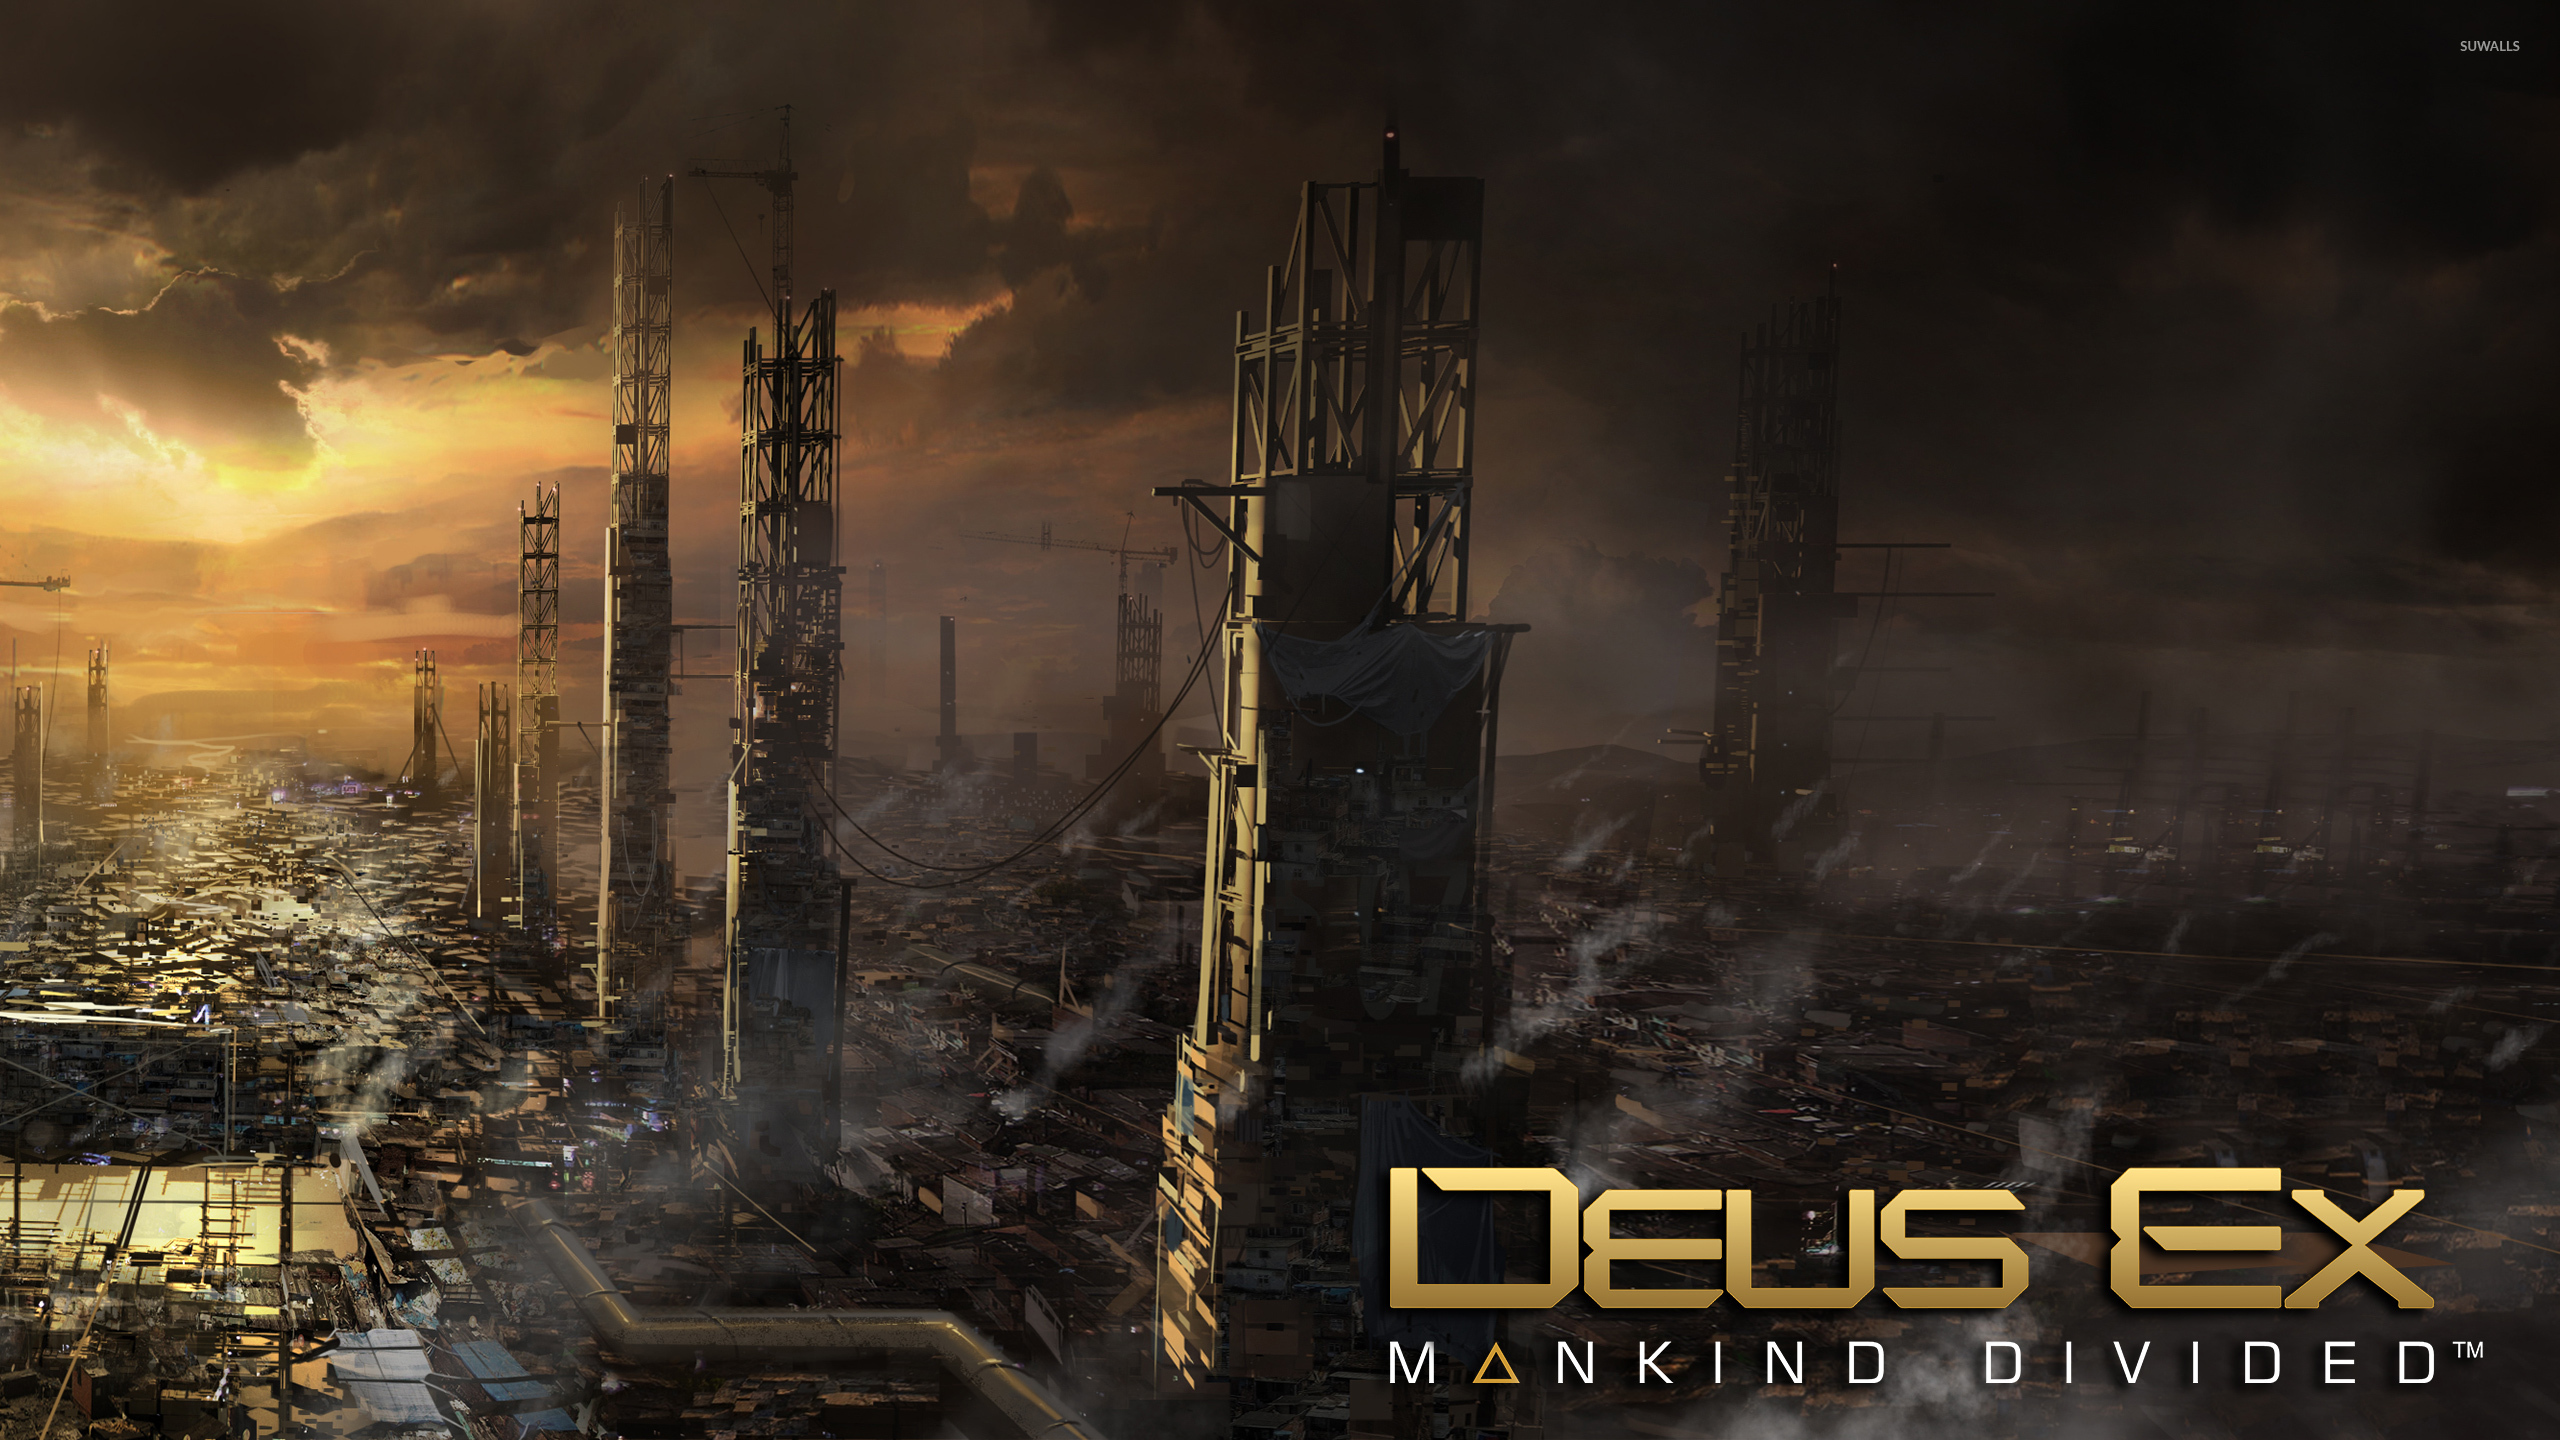 Wallpaper ID 36368  Deus Ex Mankind Divided E3 2016 Best Games 2016  game cyberpunk scifi PC Xbox one PS4 free download